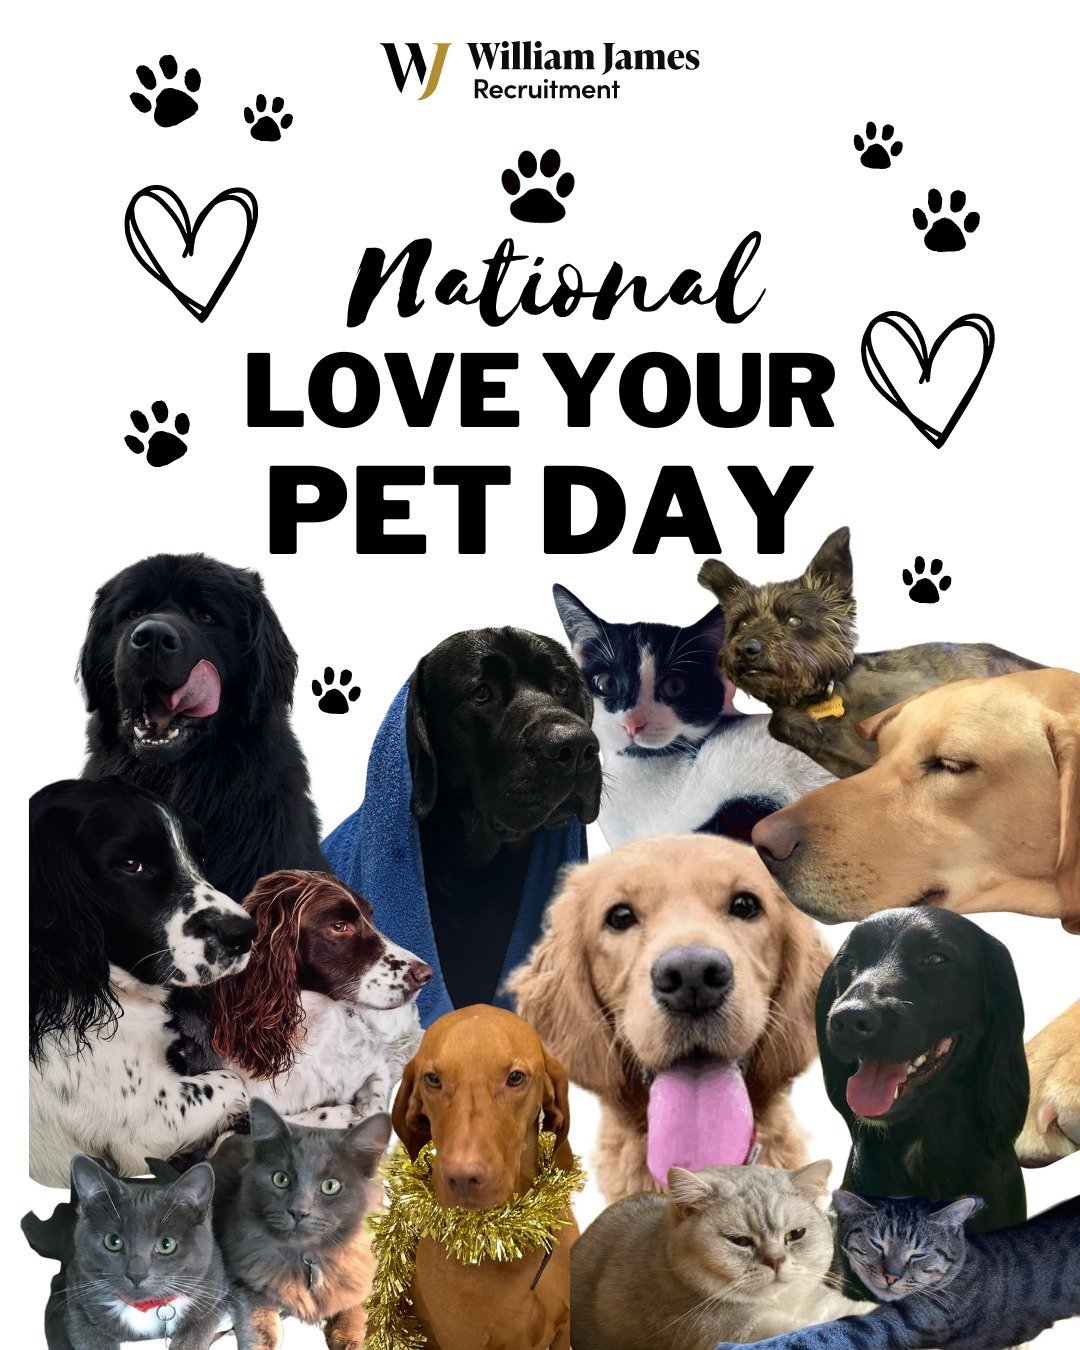 Behind every great recruiter.....is a great pet! 🐶🐱

#nationalpetday #furryfriends #legalrecruitment